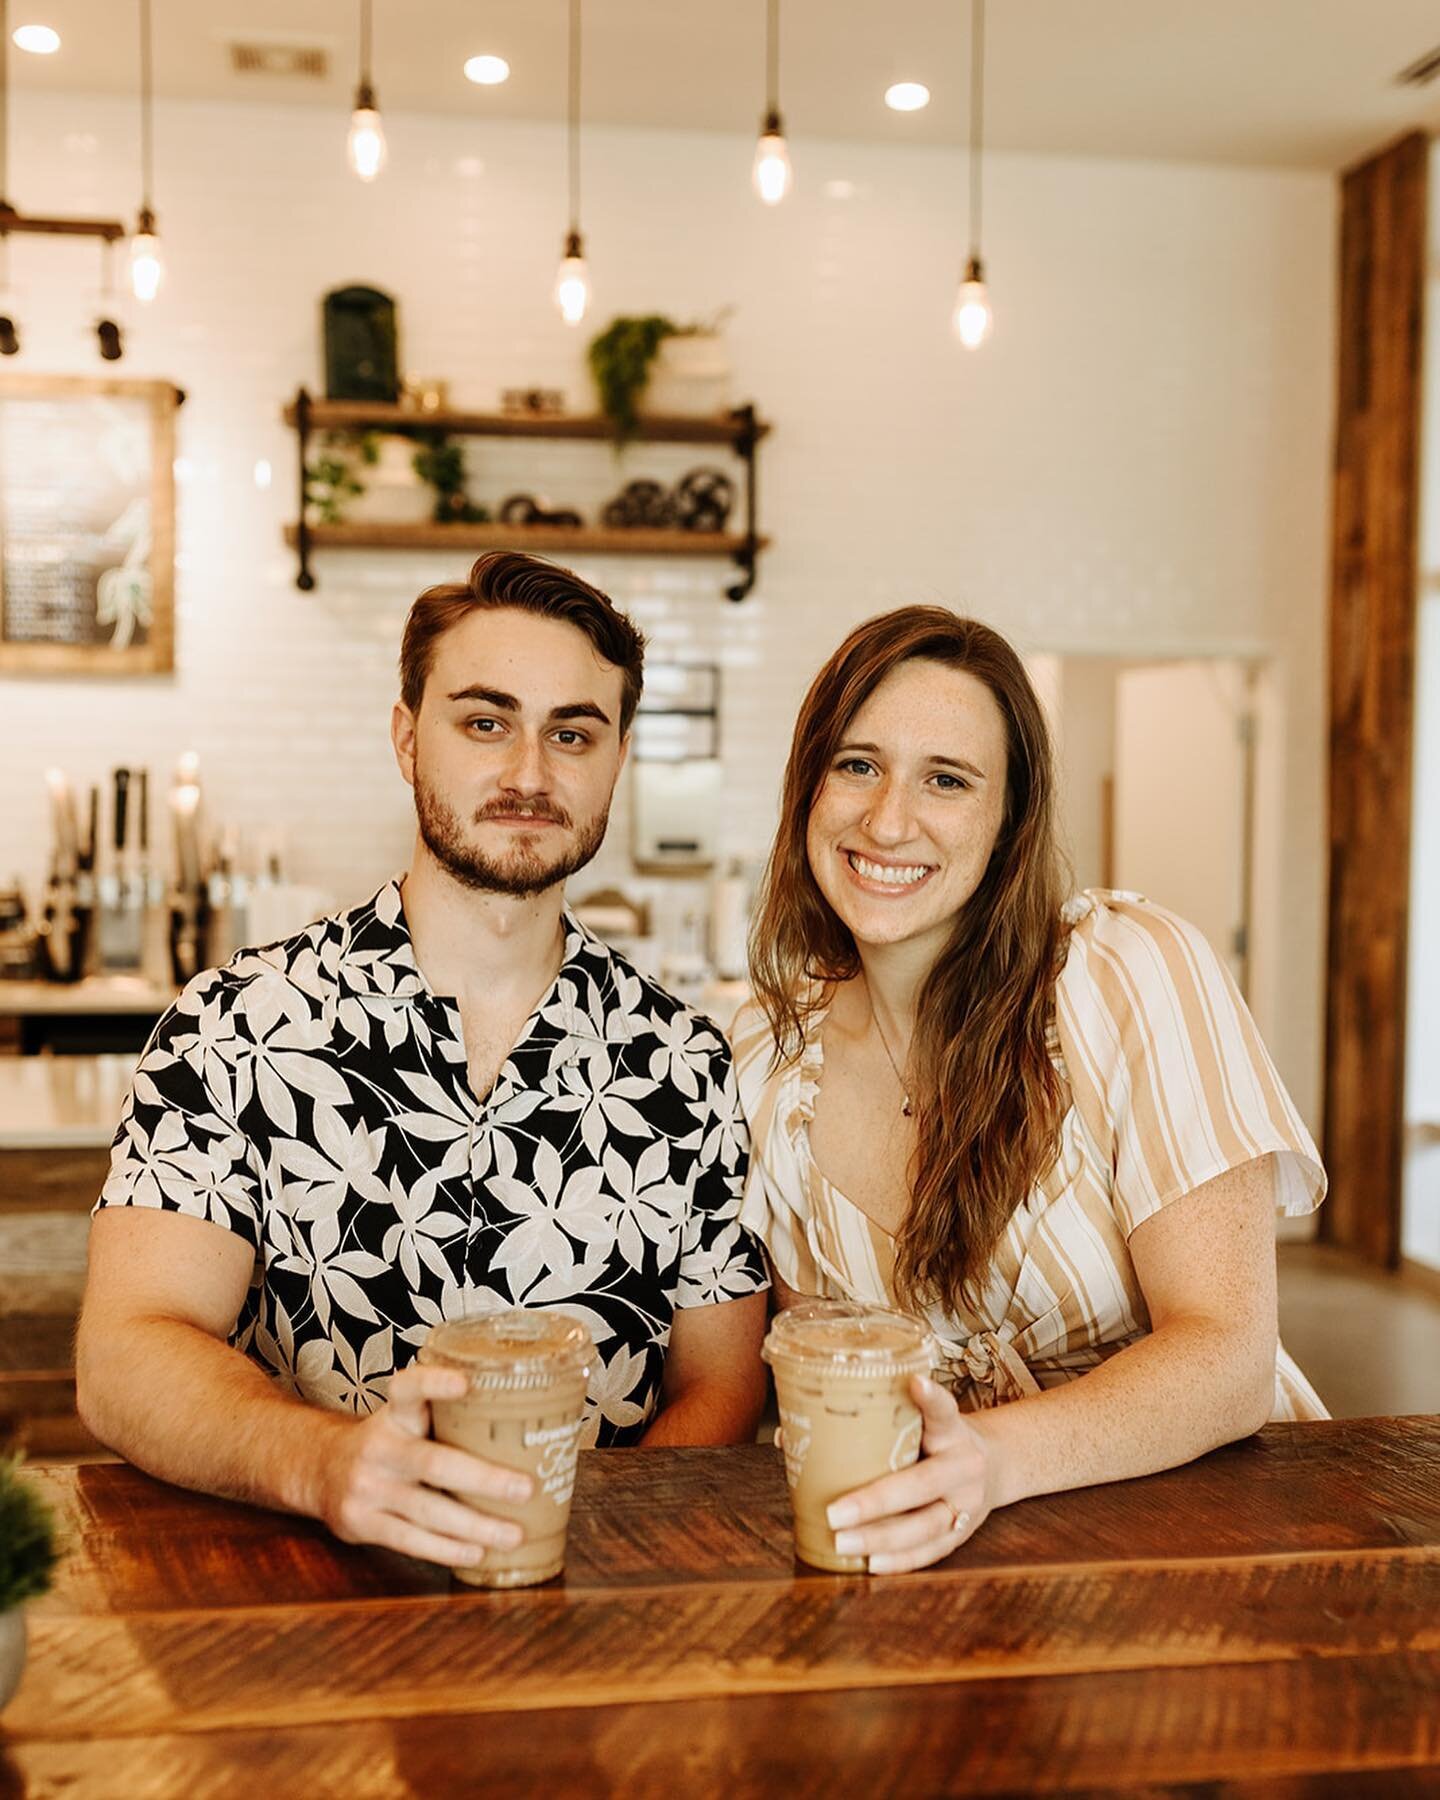 This is your sign to take your engagement photos at a cute coffee shop / hotel lobby and then go for a stroll around downtown afterwards 😍☕️

#verobeachweddings #verobeachwedding #verobeachweddingphotographer #verobeachphotographer #verobeachengagem